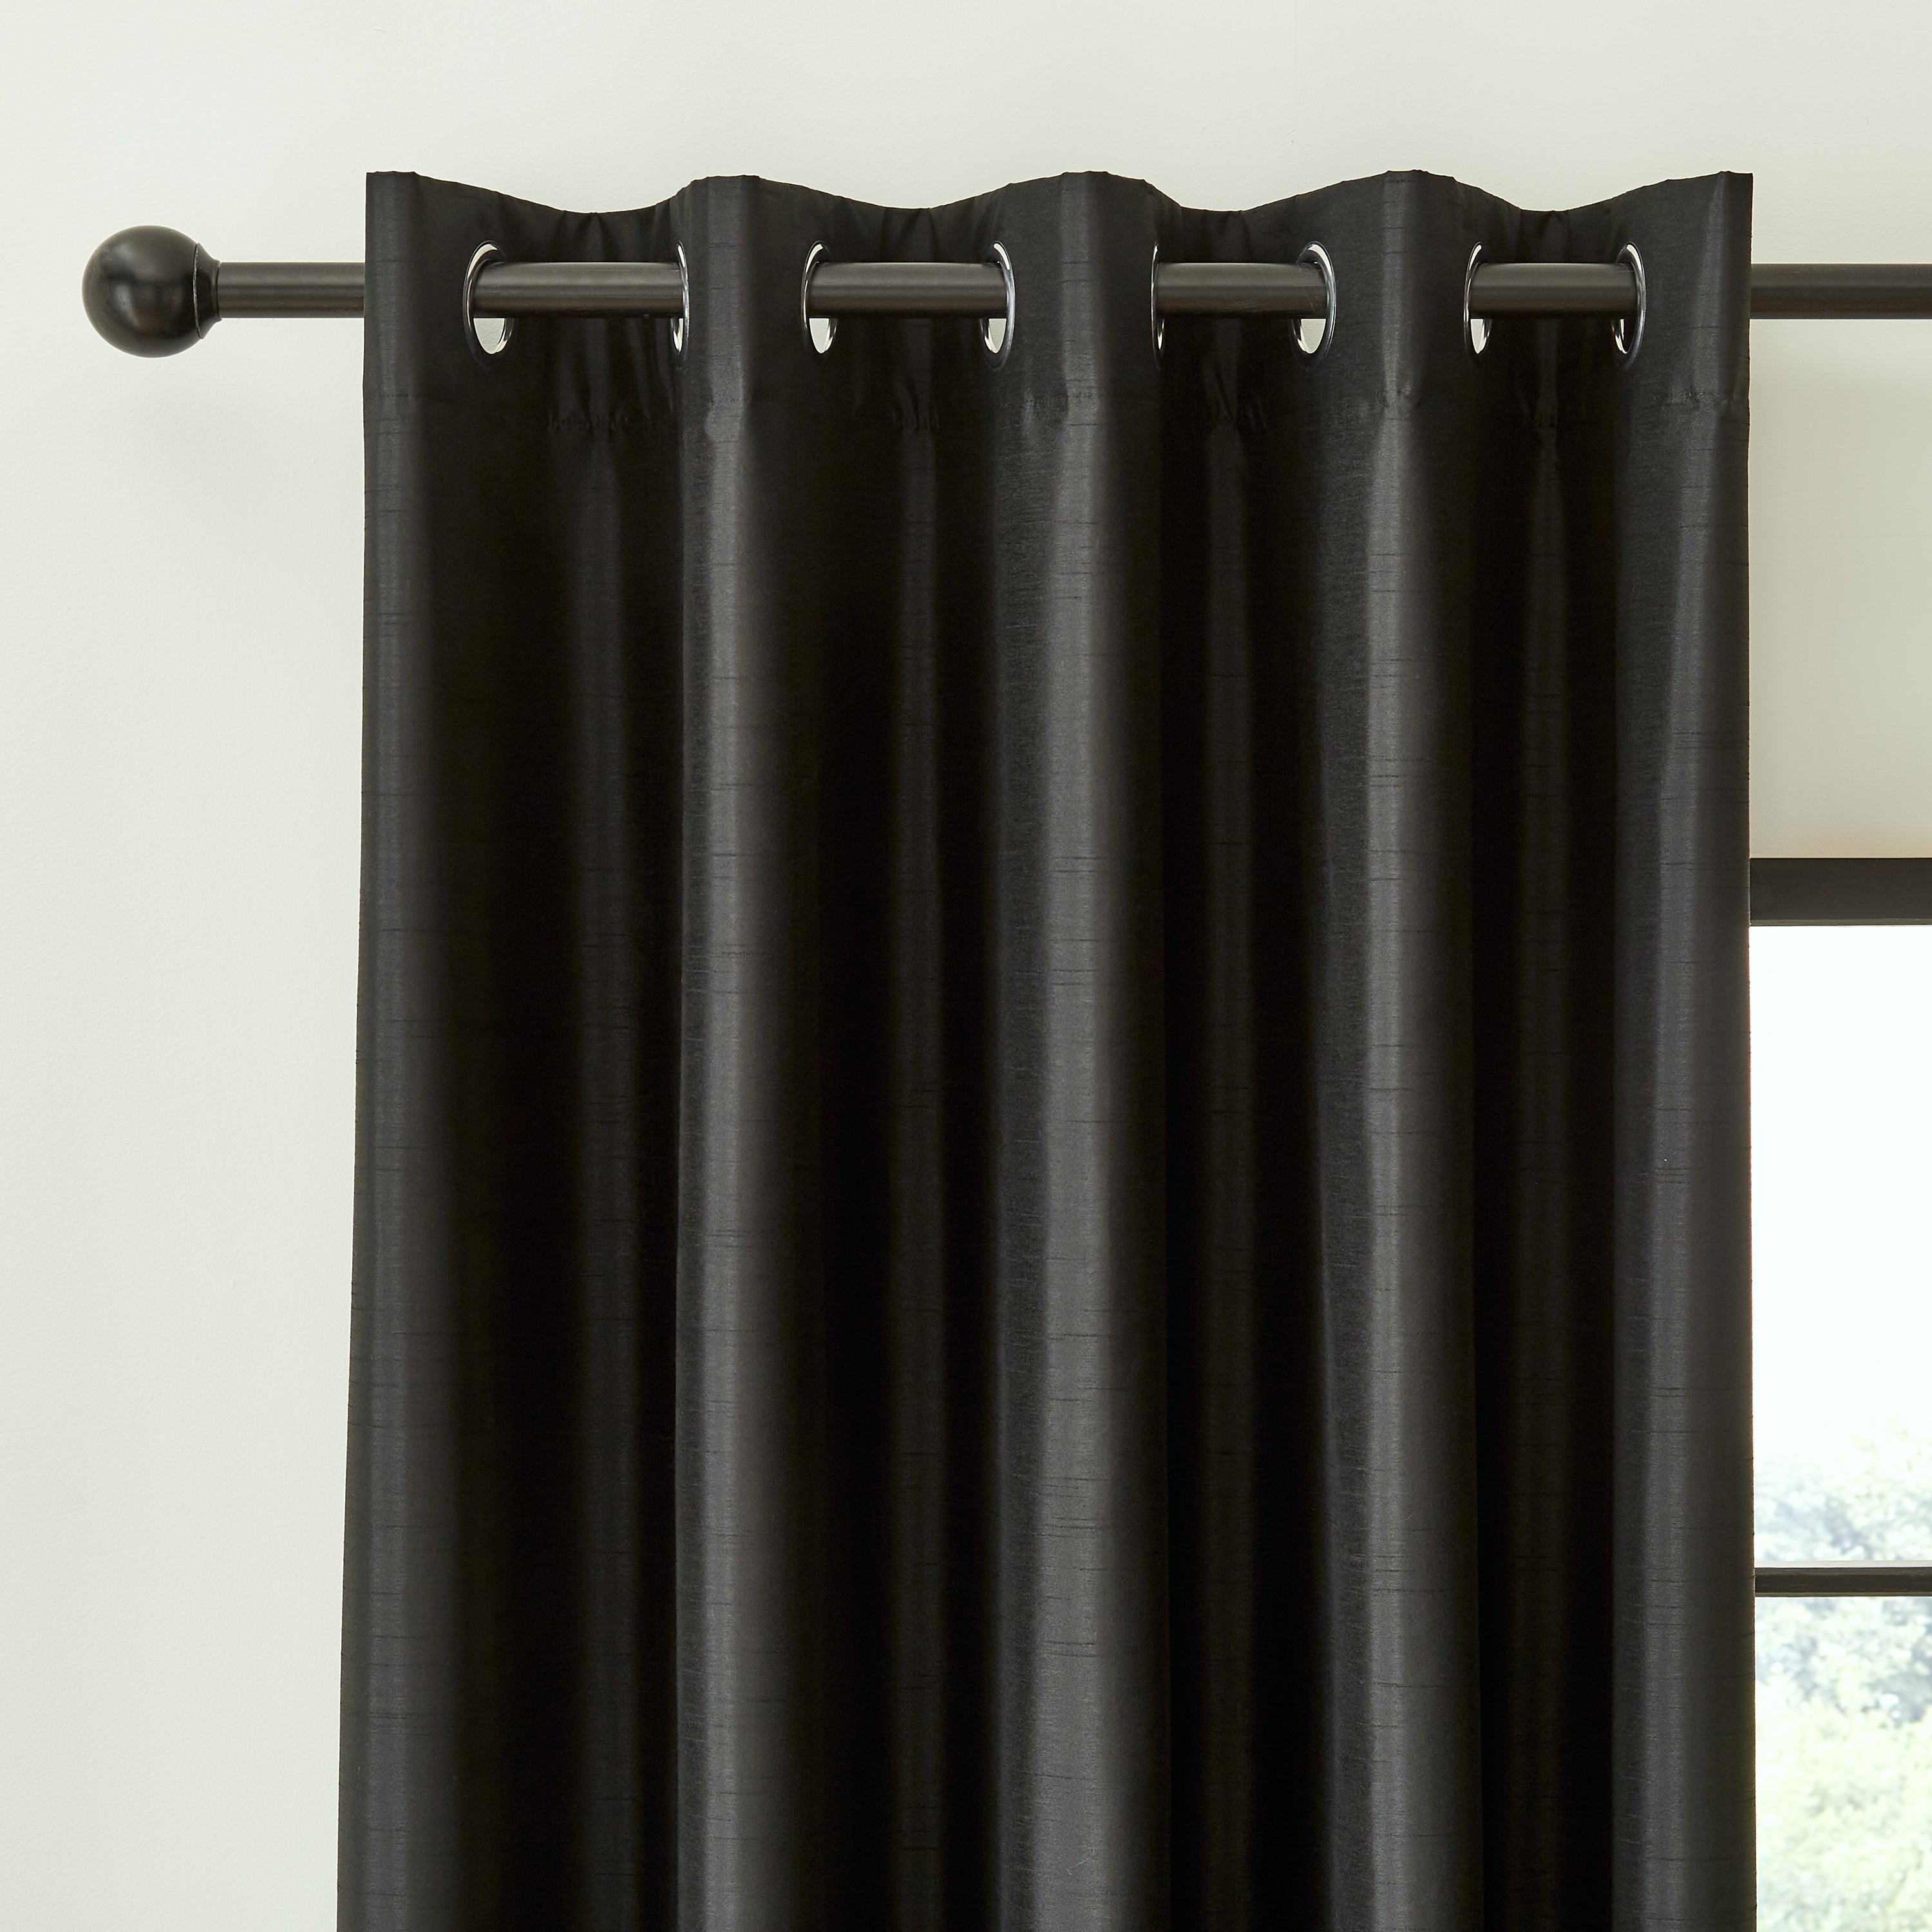 Photos - Curtains & Drapes Catherine Lansfield Faux Silk Blackout Thermal Eyelet Curtains Black 